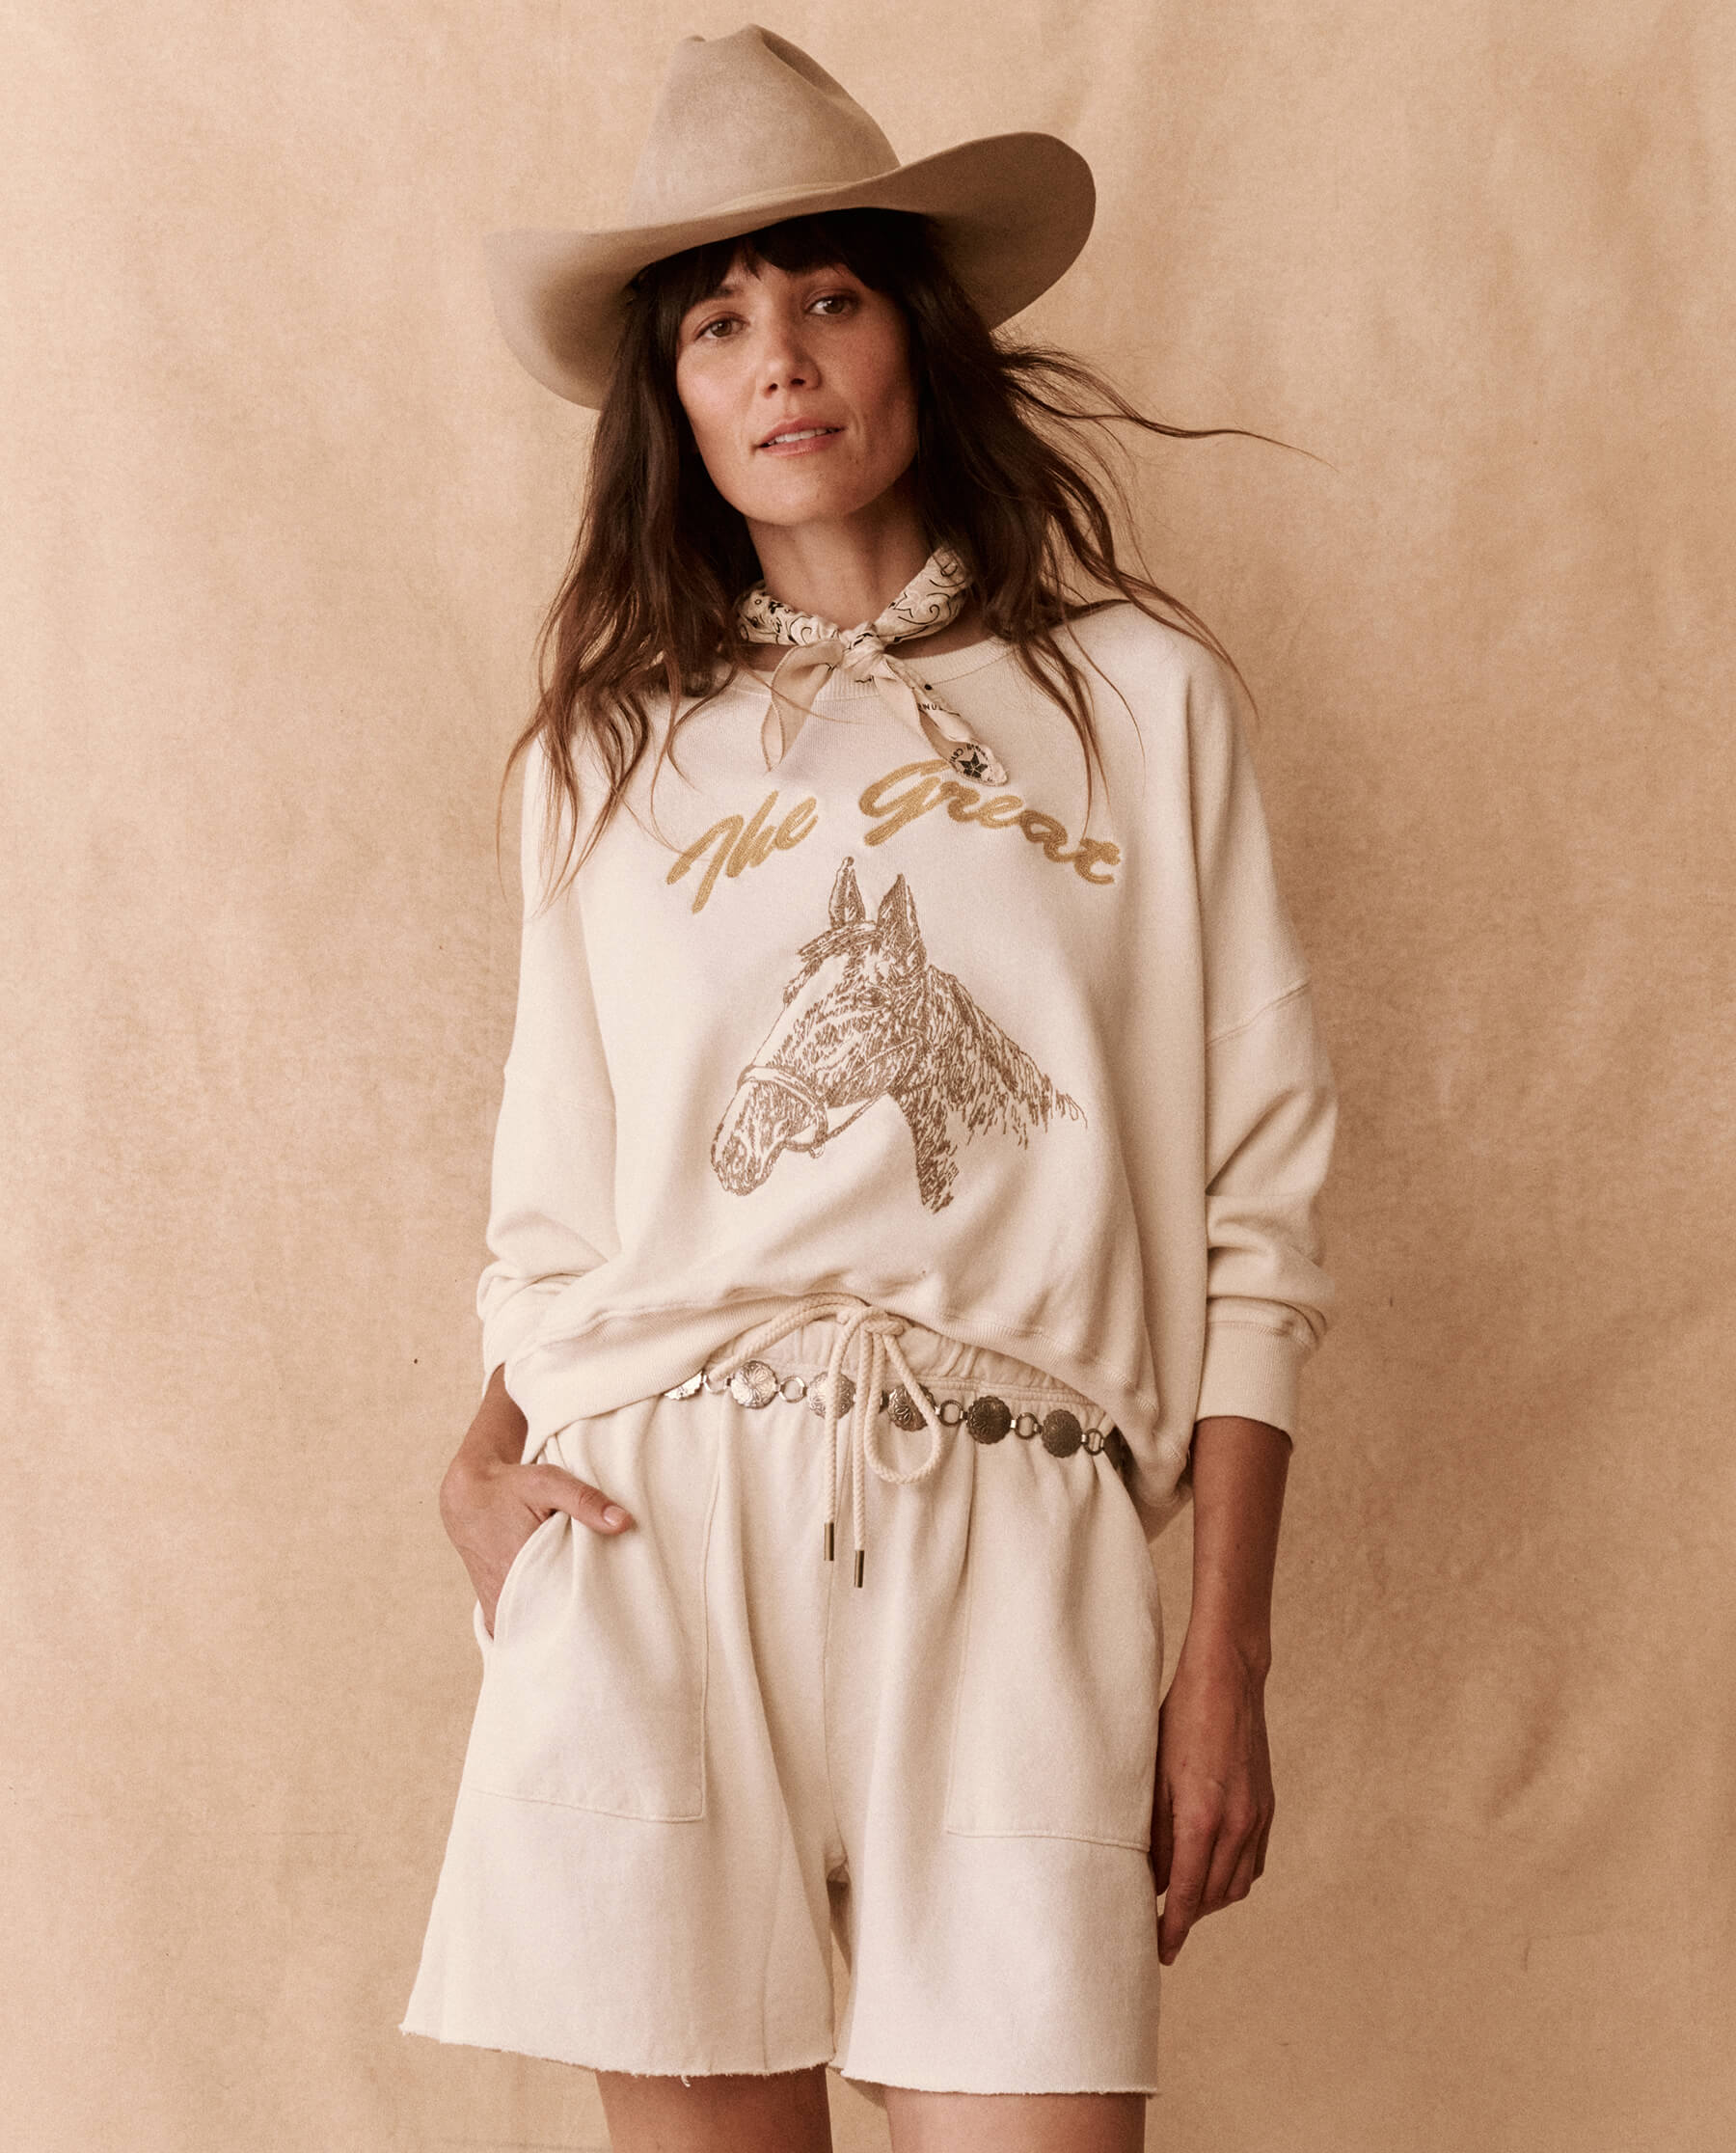 The Teammate Sweatshirt. Graphic -- Washed White with Spice Horse Embroidery